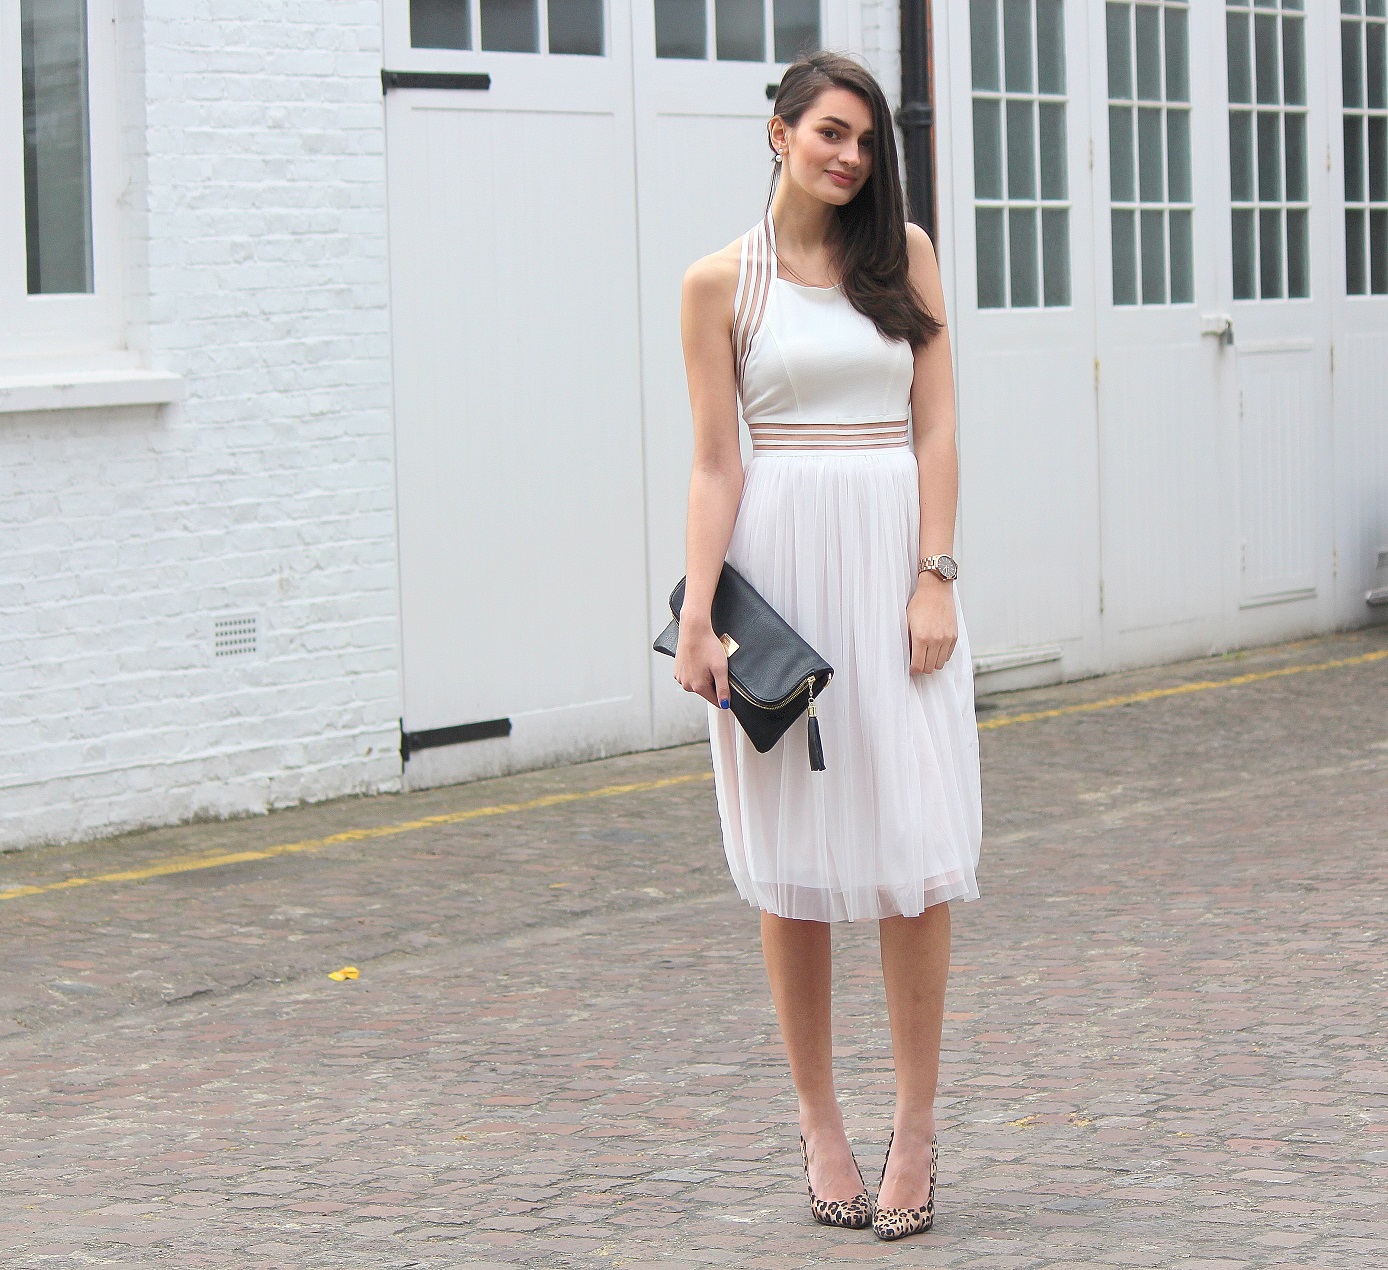 peexo fashion blogger wearing white backless dress and leopard print heels and black clutch in spring